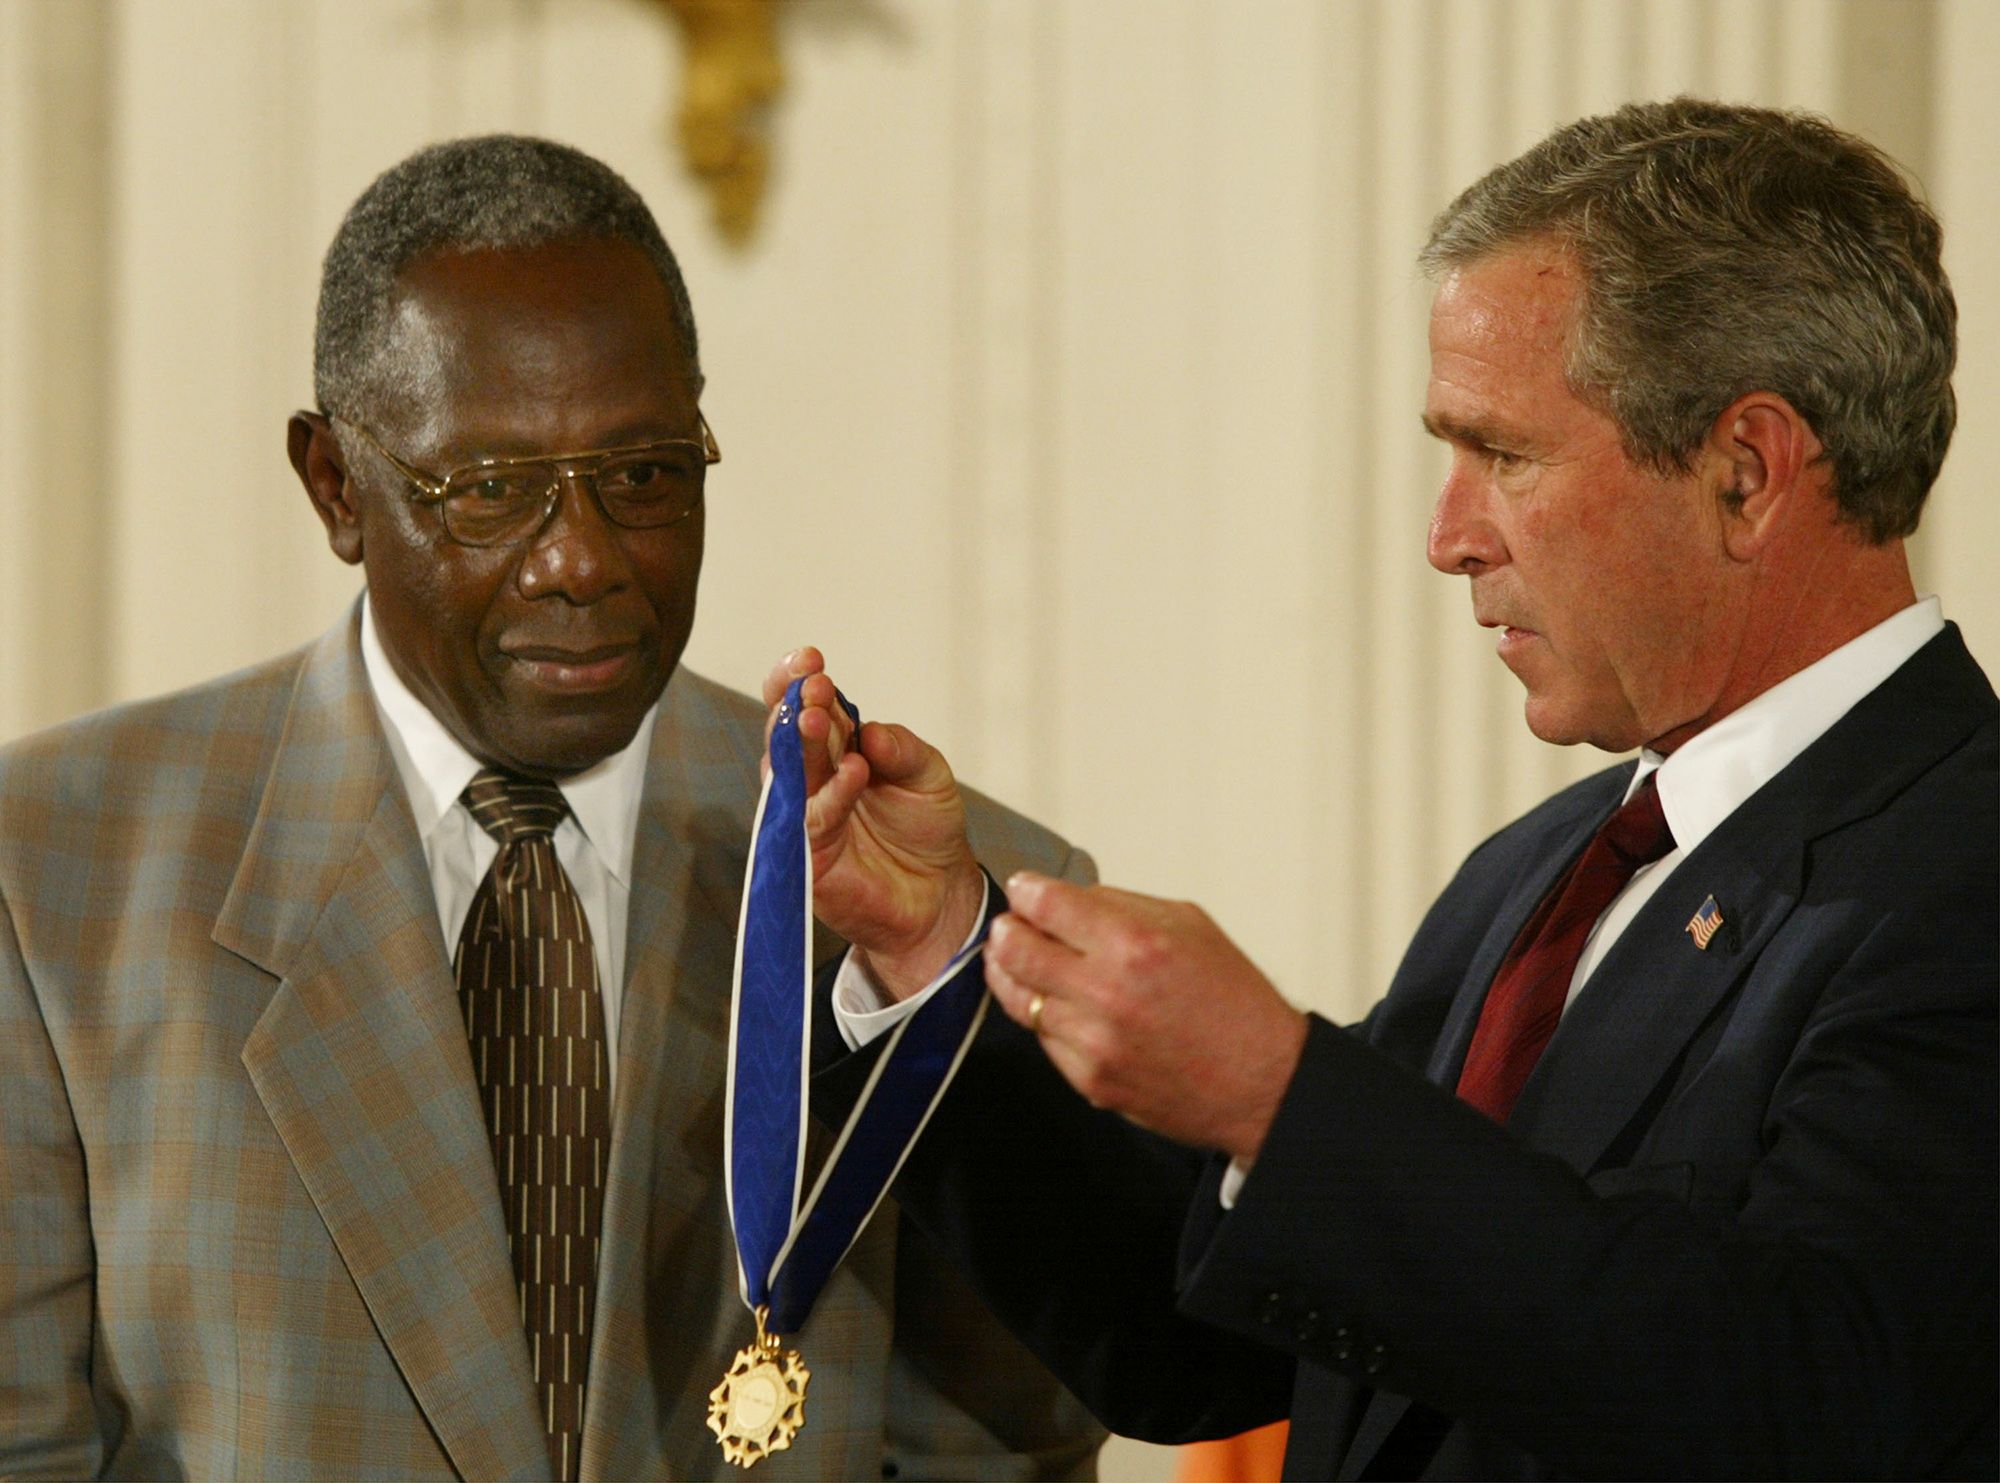 Hank Aaron is honored during a pregame awards ceremony at News Photo -  Getty Images